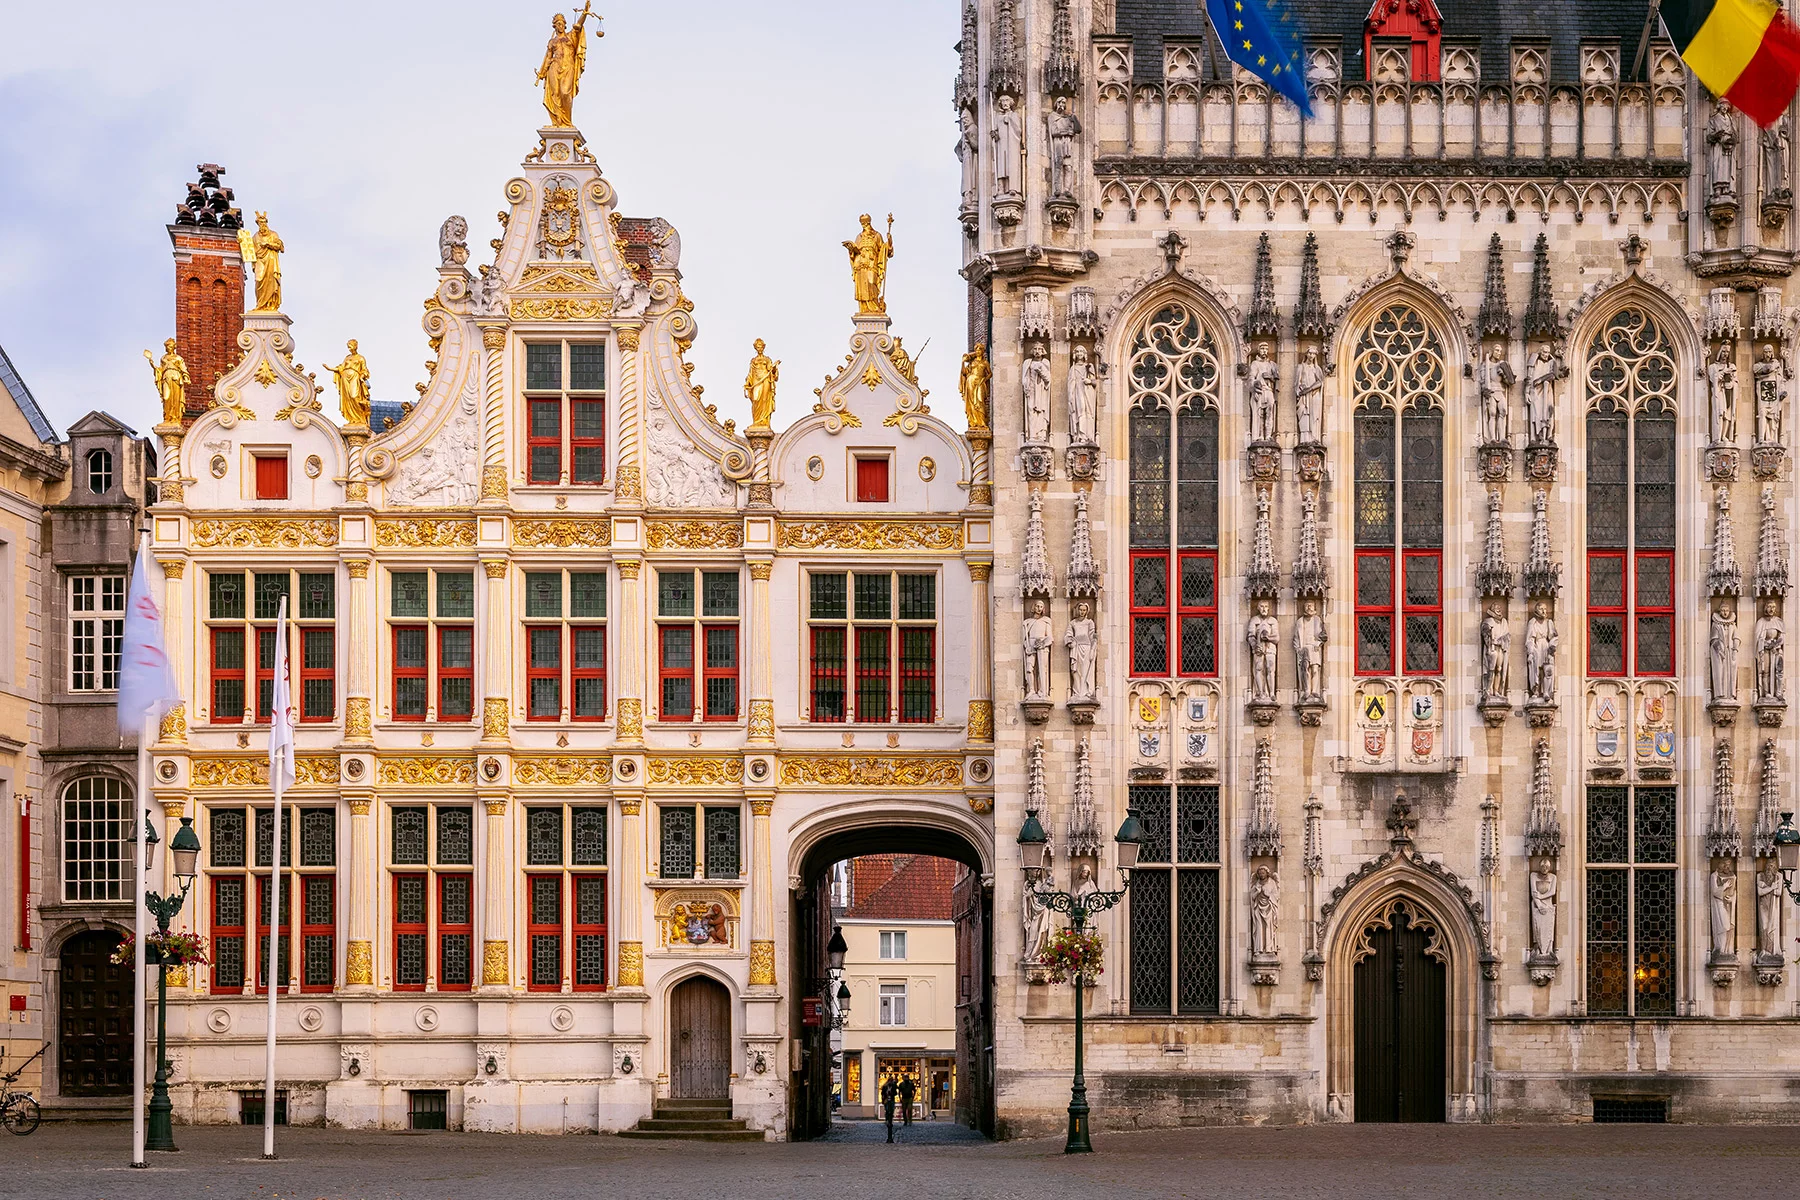 A gothic building with lots of gilded elements, EU and Belgian flags.